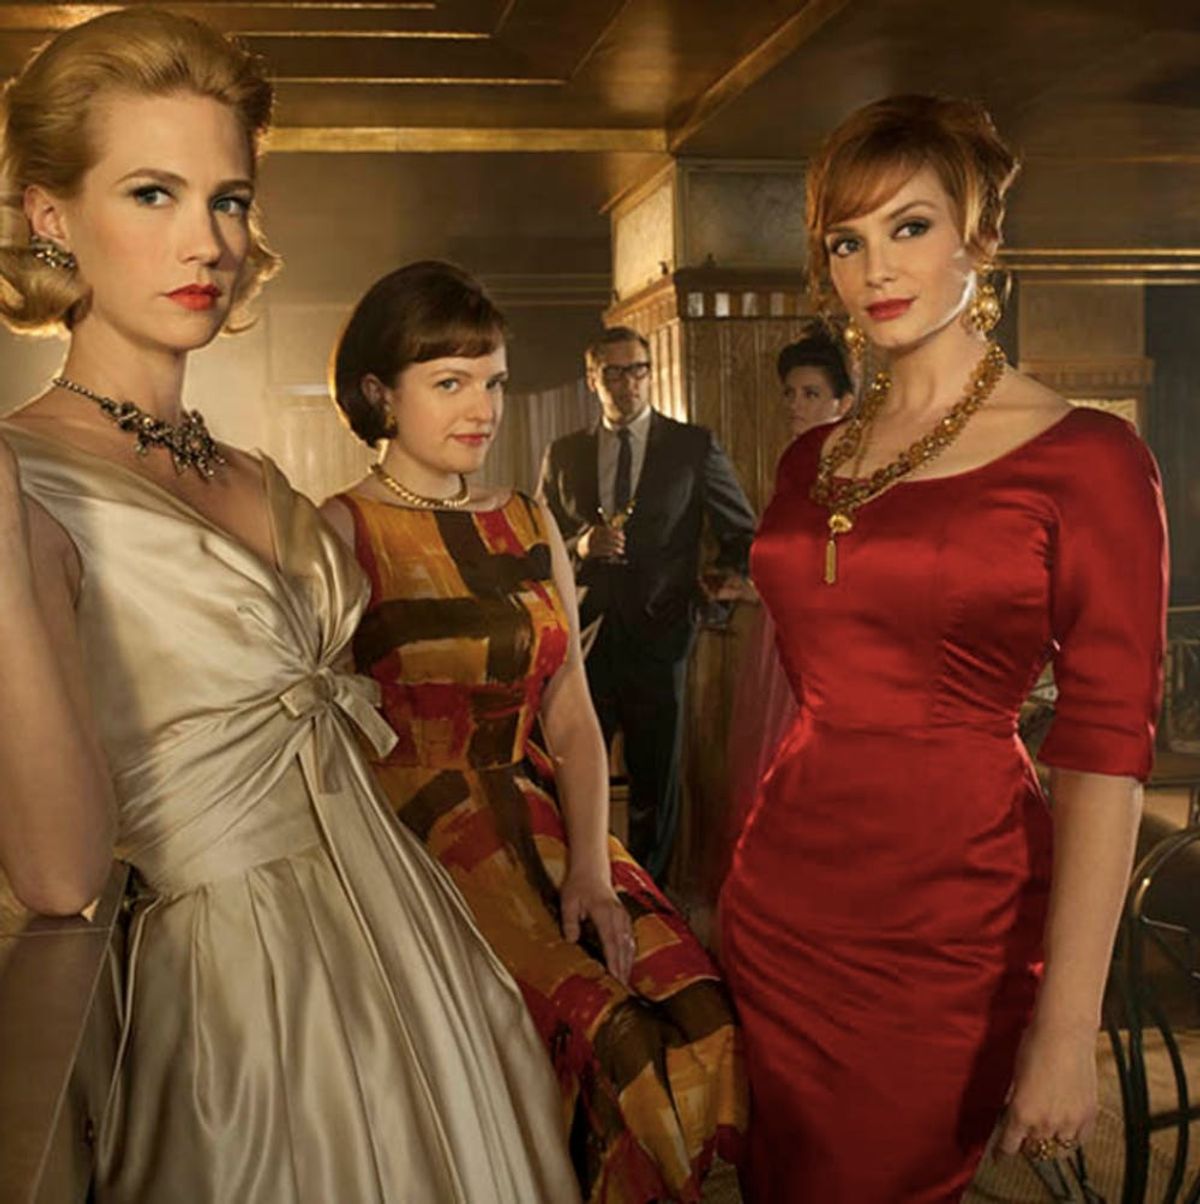 You’ll Be Shocked by How Much (and How Little) Women’s Rights Have Changed Since the Mad Men Era